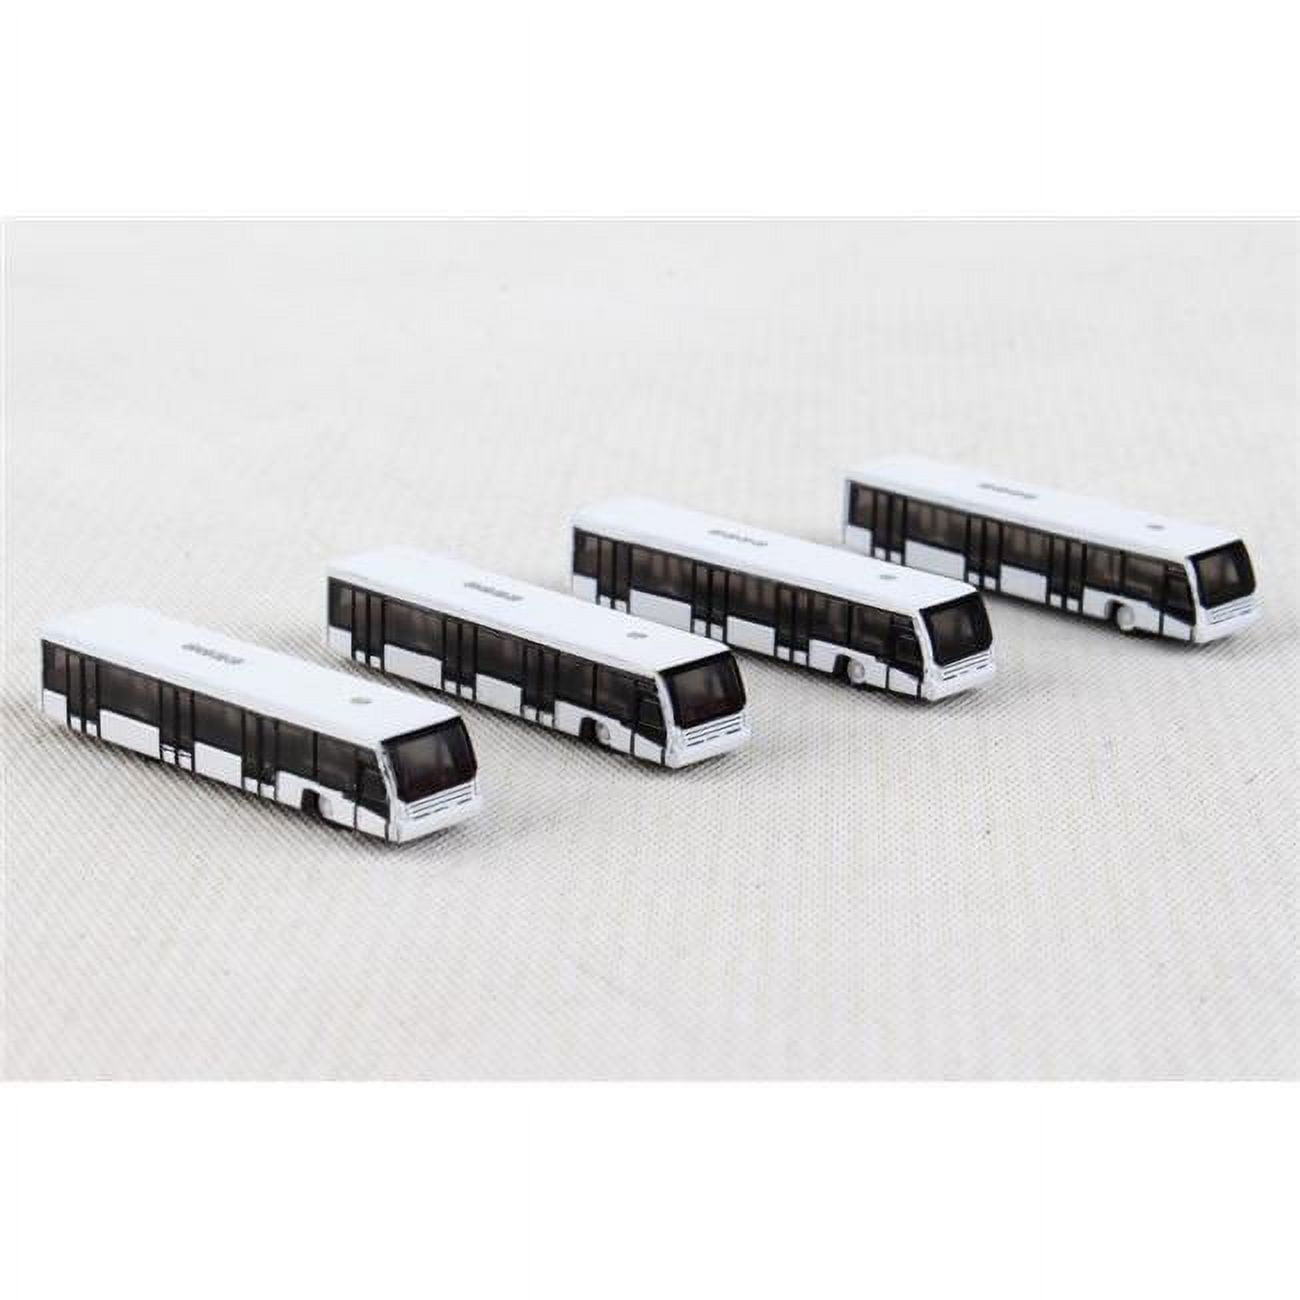 Picture of Herpa HE533706 Airport Bus Set 1-500